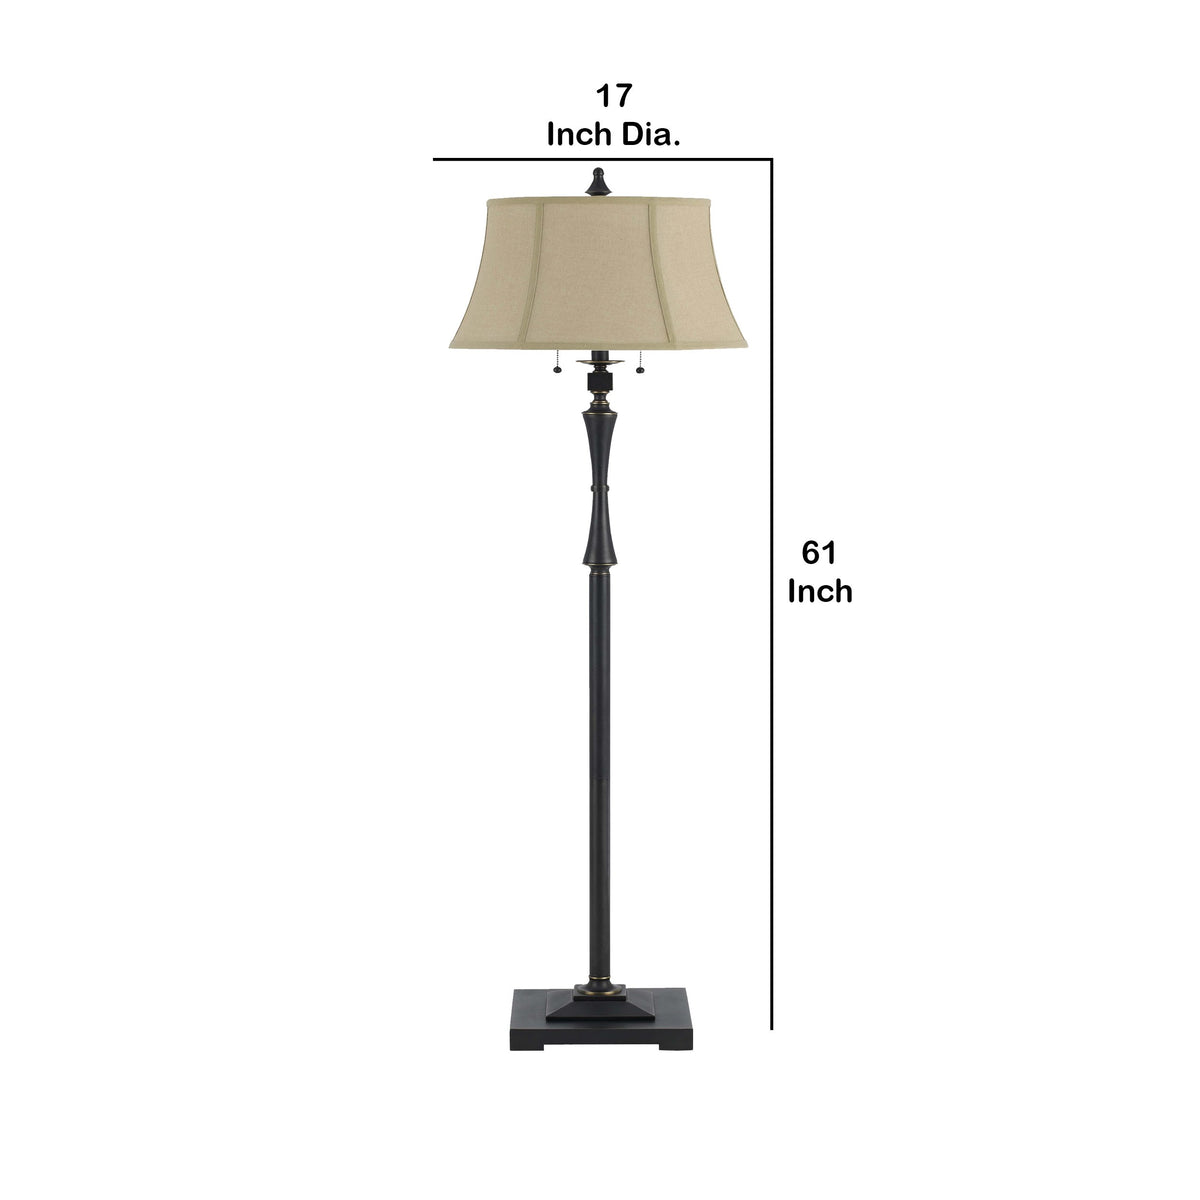 Metal Body Floor Lamp with Fabric Tapered Bell Shade, Black and Beige - BM223603